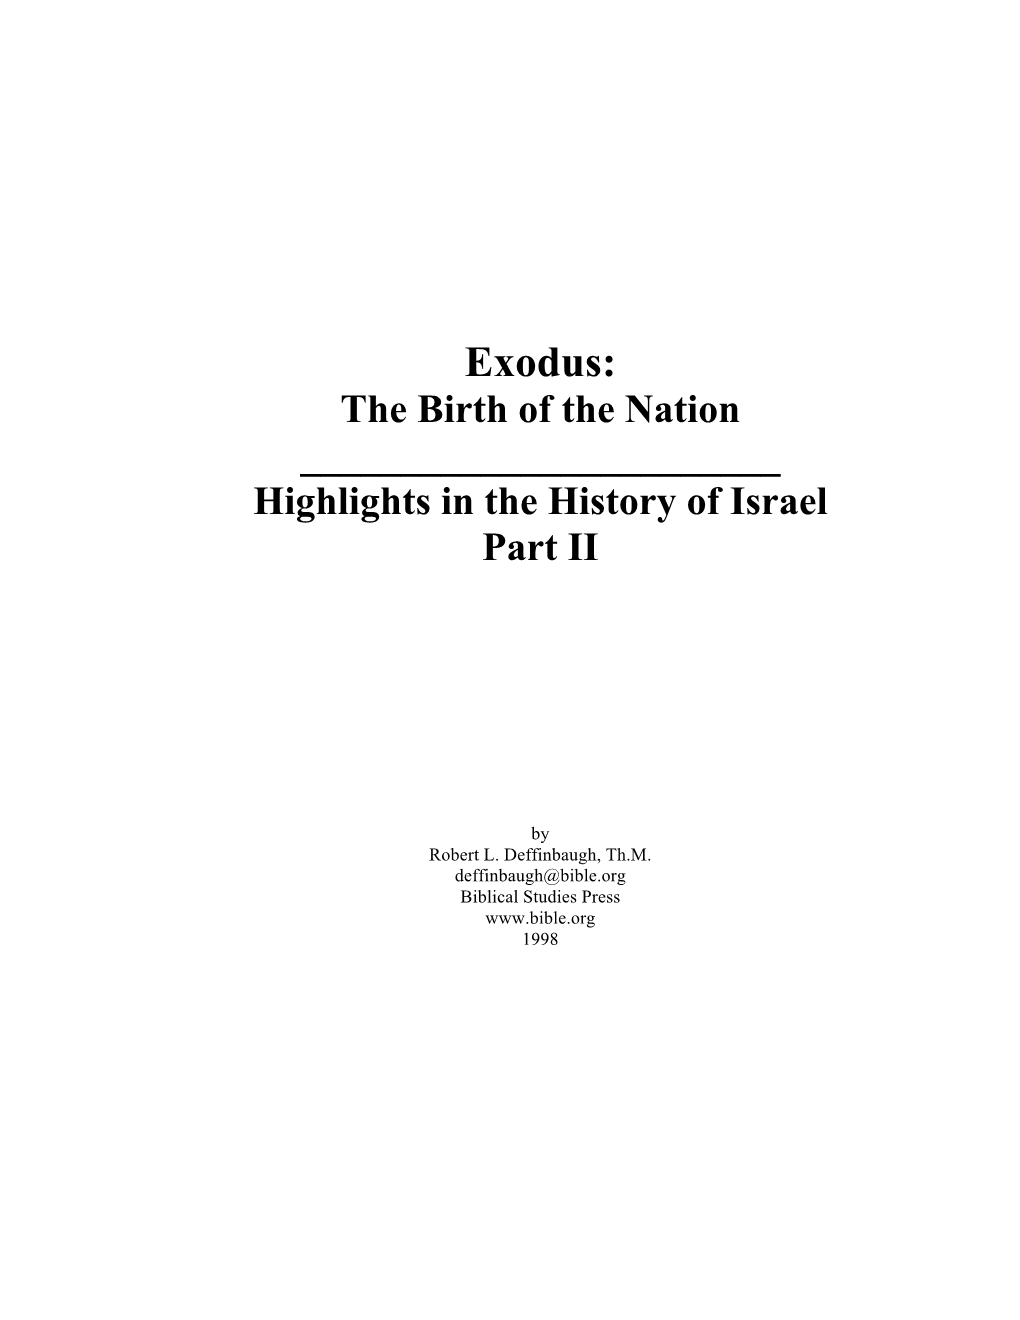 Exodus: the Birth of the Nation ______Highlights in the History of Israel Part II